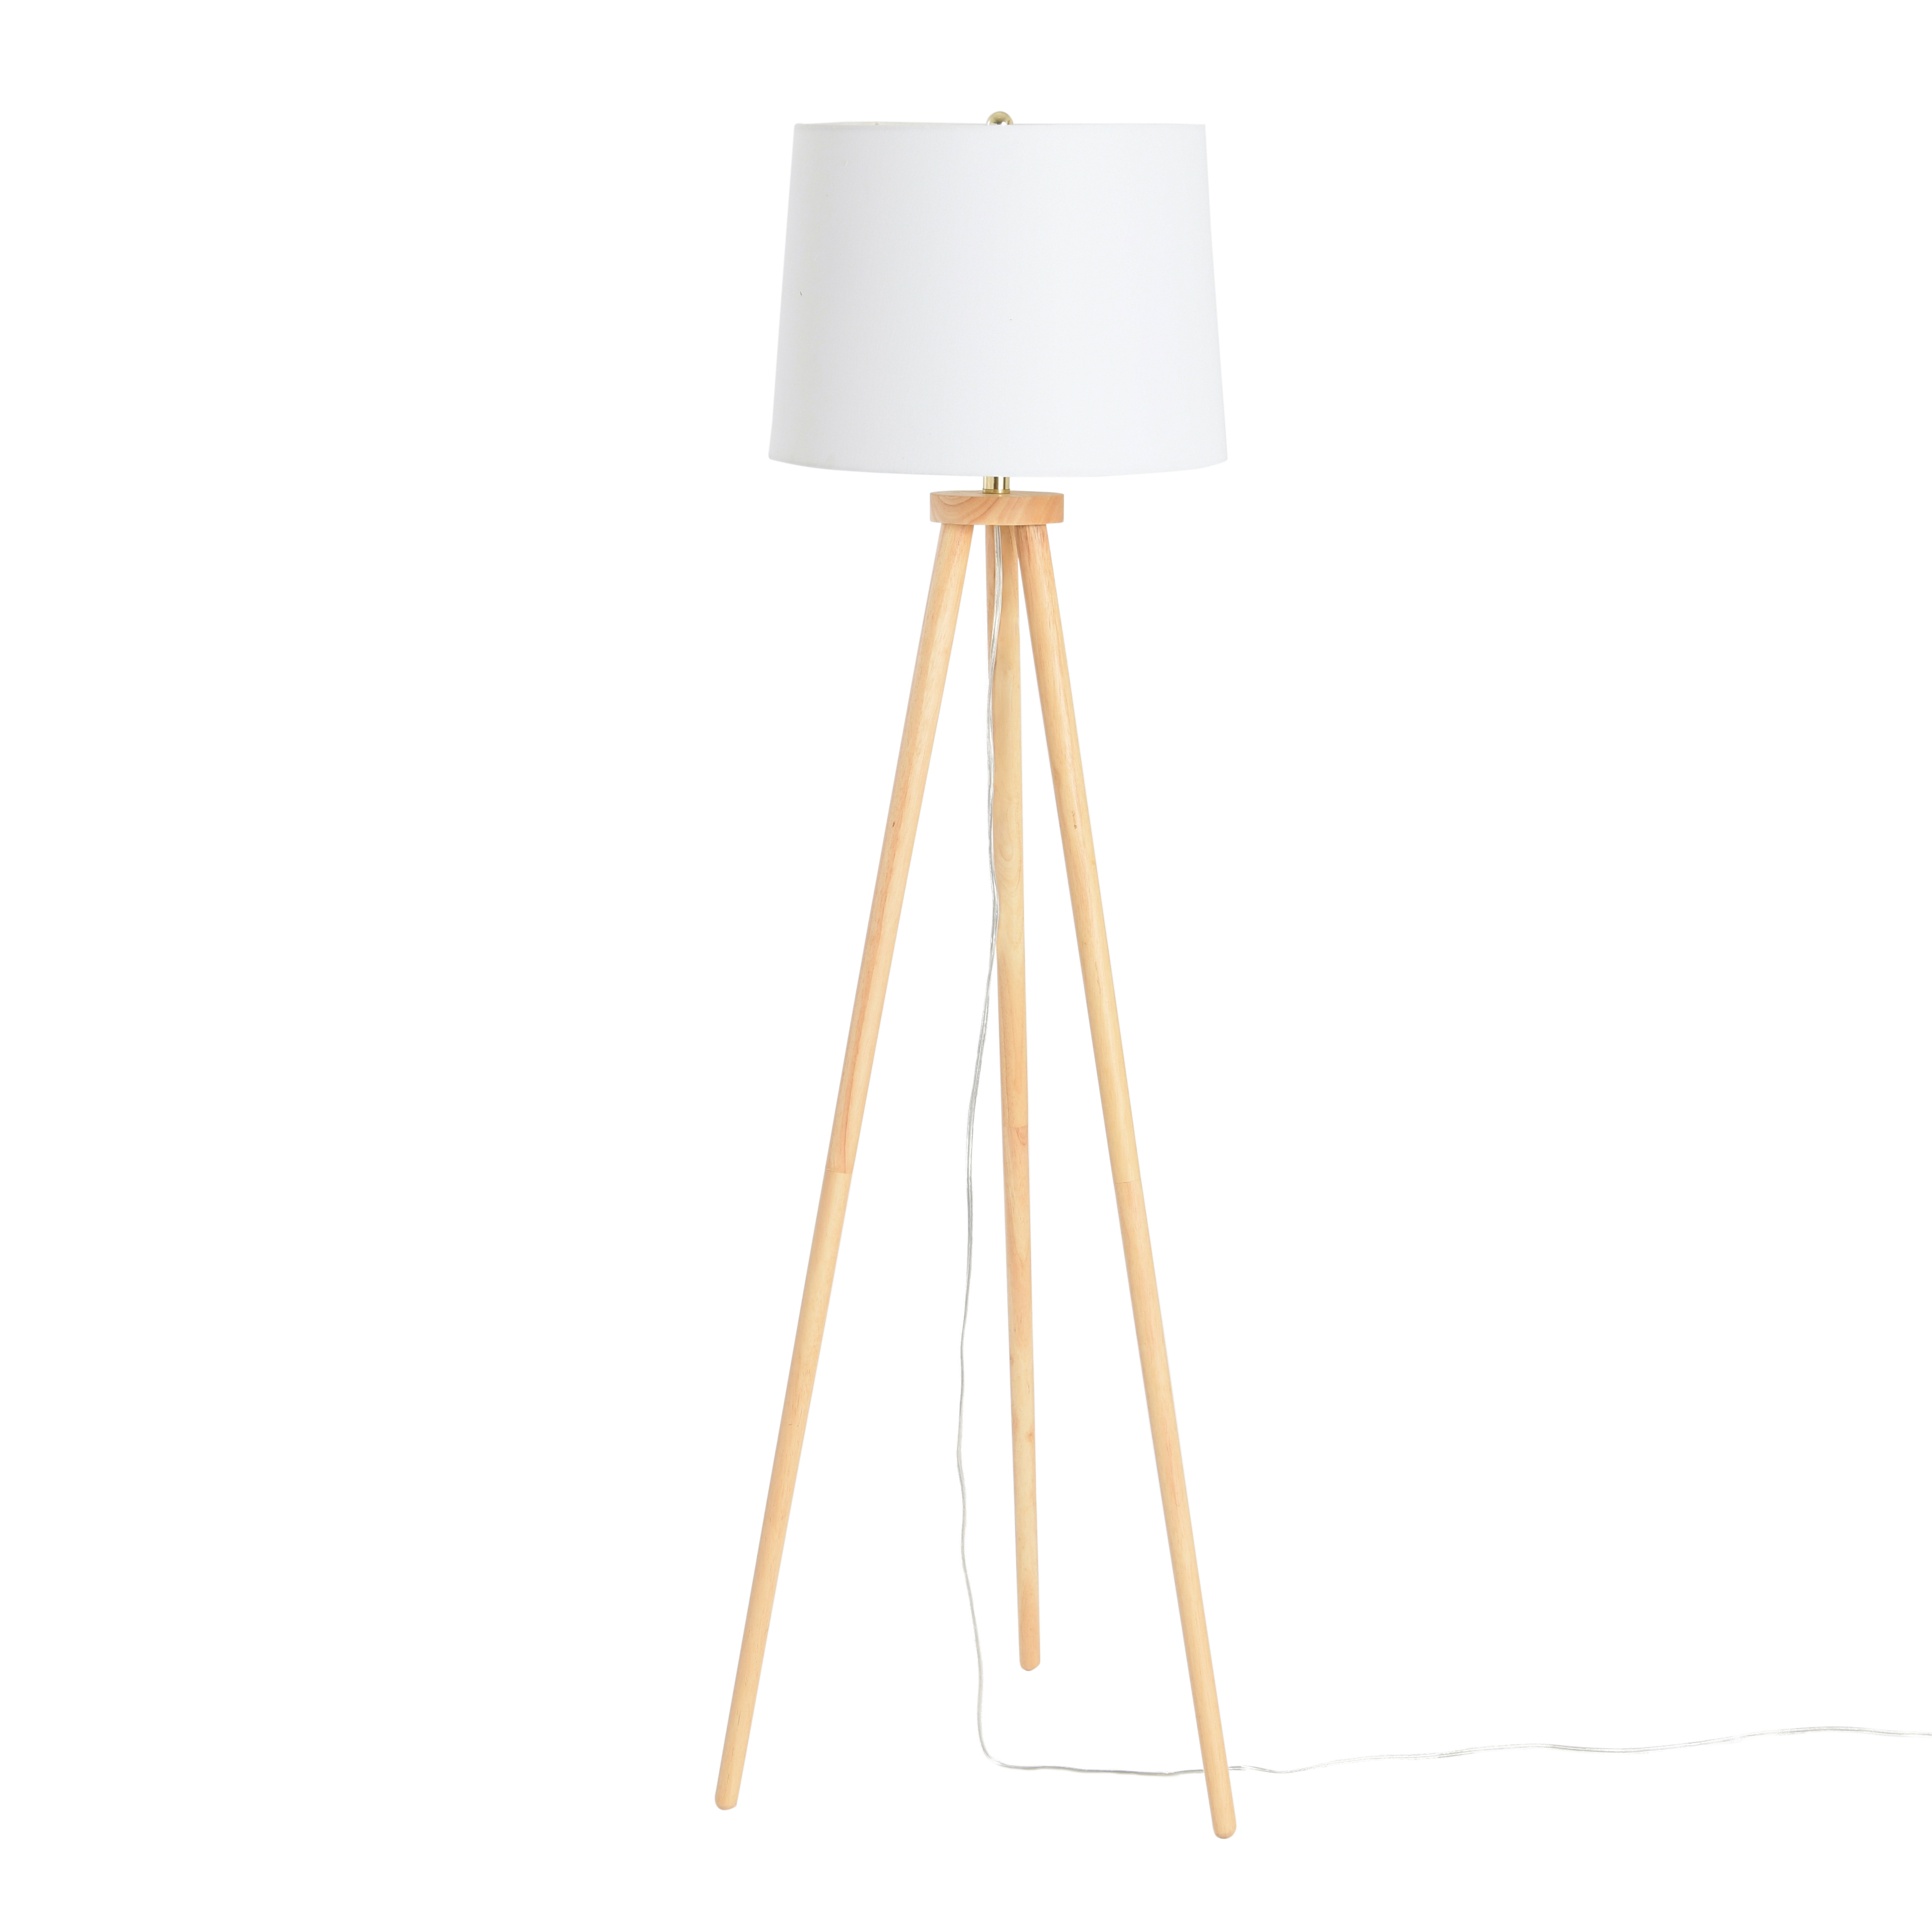 A-Frame Tripod Rubber Wood Floor Lamp, Cream Linen Shade, Natural - Nomad Home